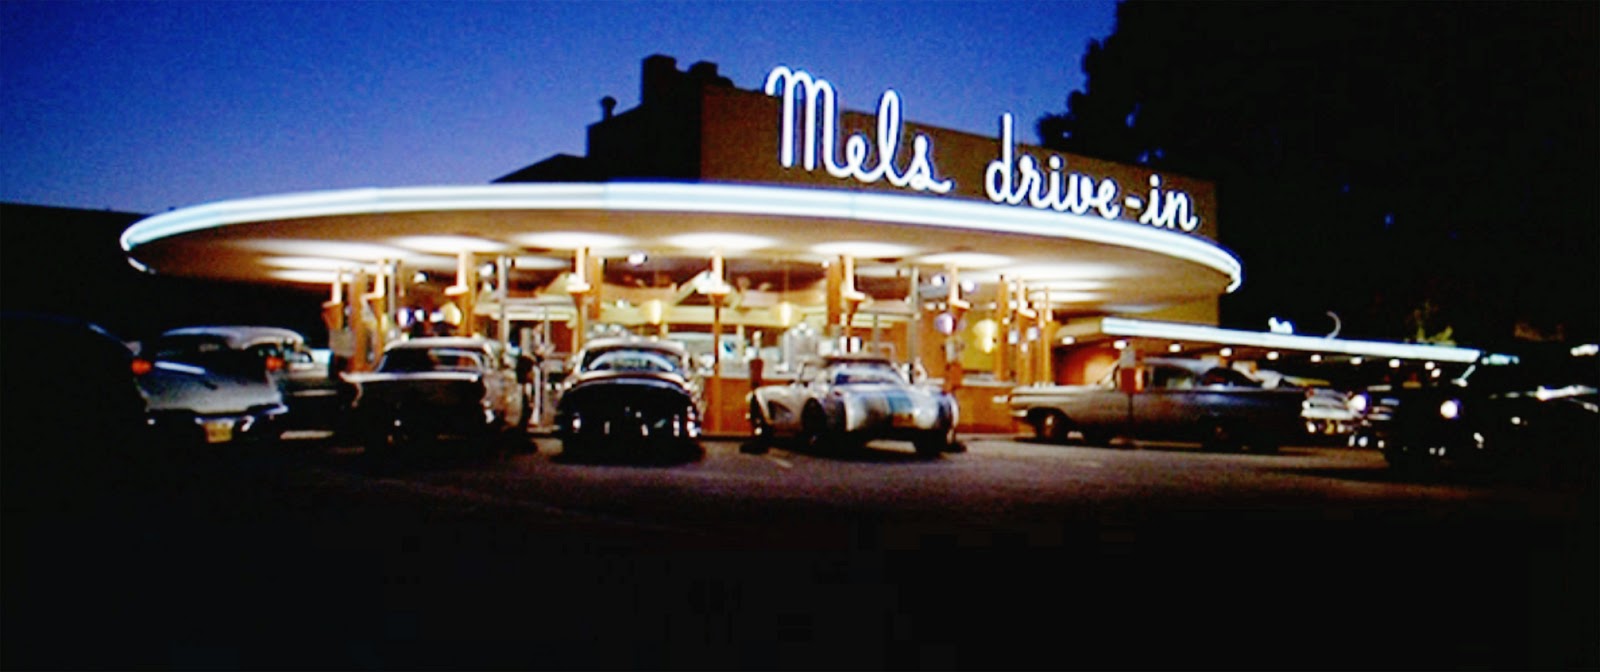 Free Download Directed By George Lucas Seen Here Mels Drive In Restaurant 1600x672 For Your Desktop Mobile Tablet Explore 49 Mel S Diner Wallpaper Mel S Diner Wallpaper Retro Diner Wallpaper